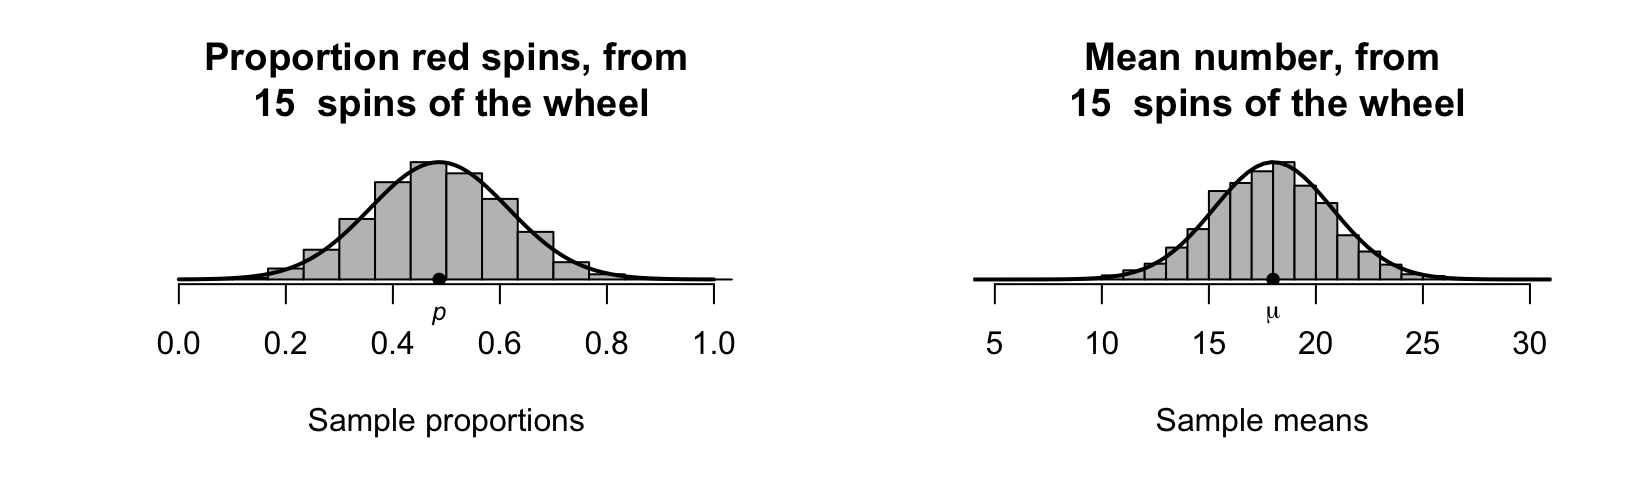 Sampling distributions for the proportion of red spins (left), and the mean of the numbers after $15$ roulette wheel spins (right)